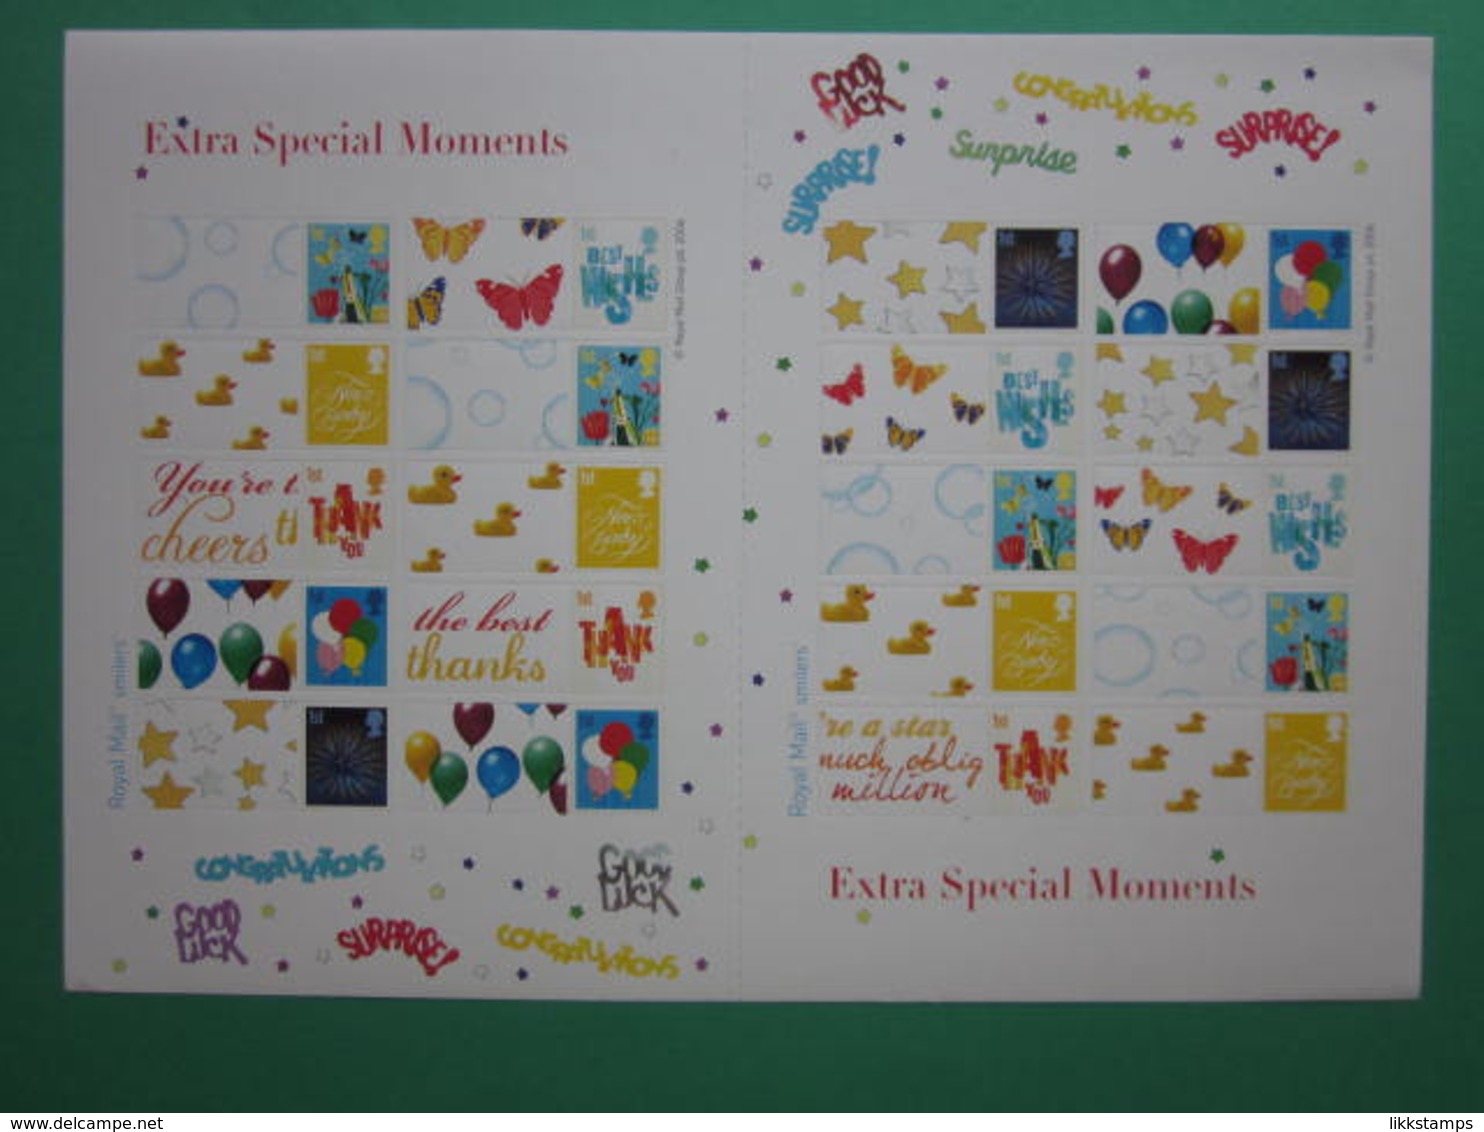 2006 ROYAL MAIL EXTRA SPECIAL MOMENTS GENERIC SMILERS SHEET. #SS0037 - Timbres Personnalisés